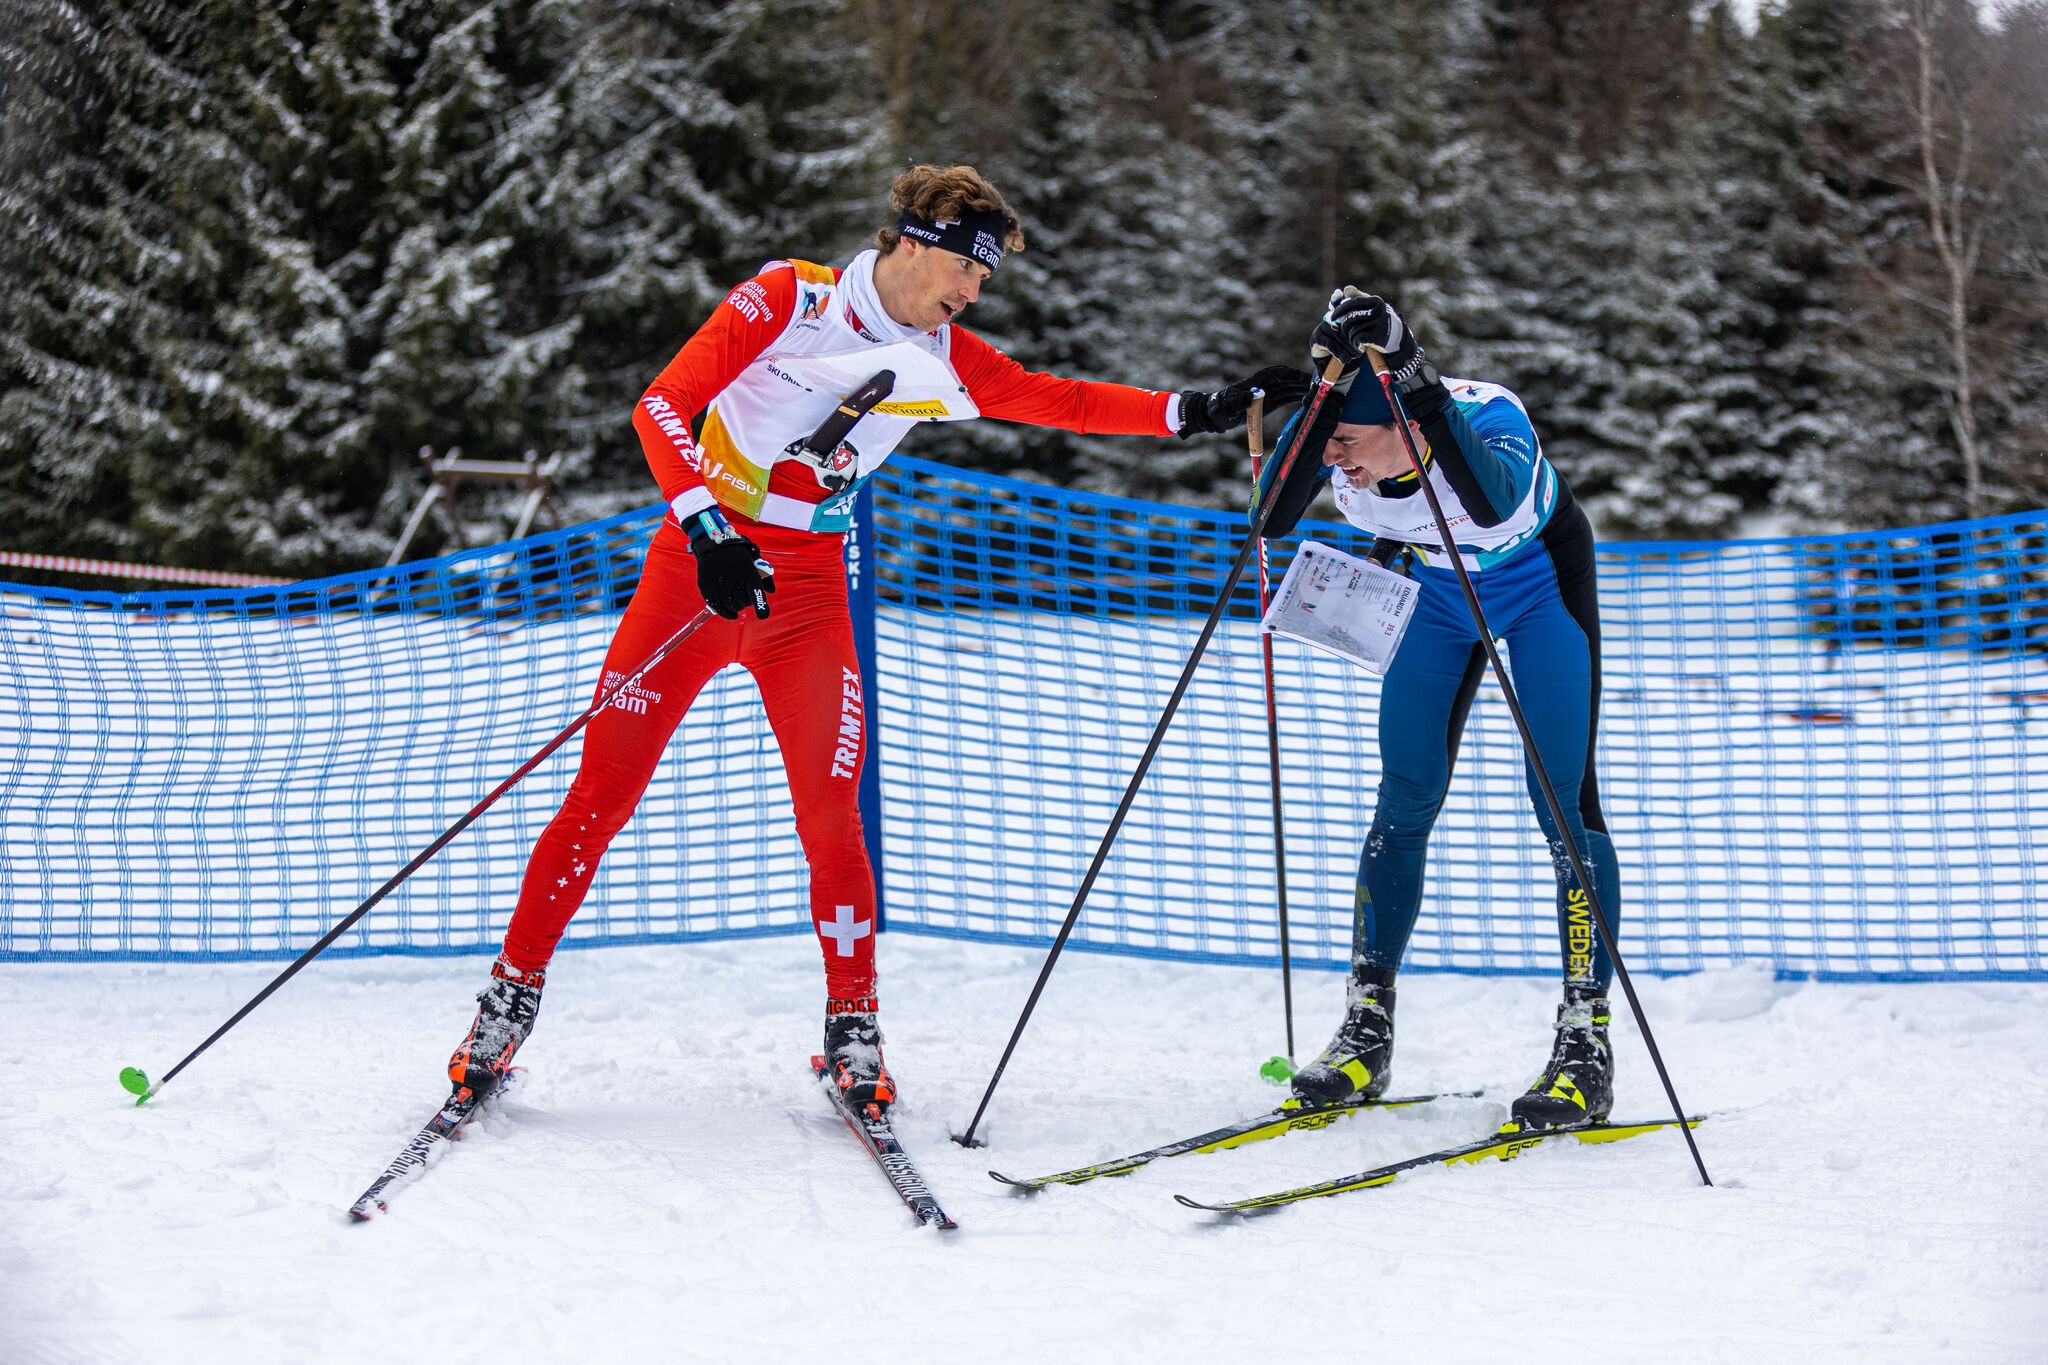 Switzerland came second overall at the FISU Ski Orienteering Championships with two golds, one silver and three bronze medals ©FISU